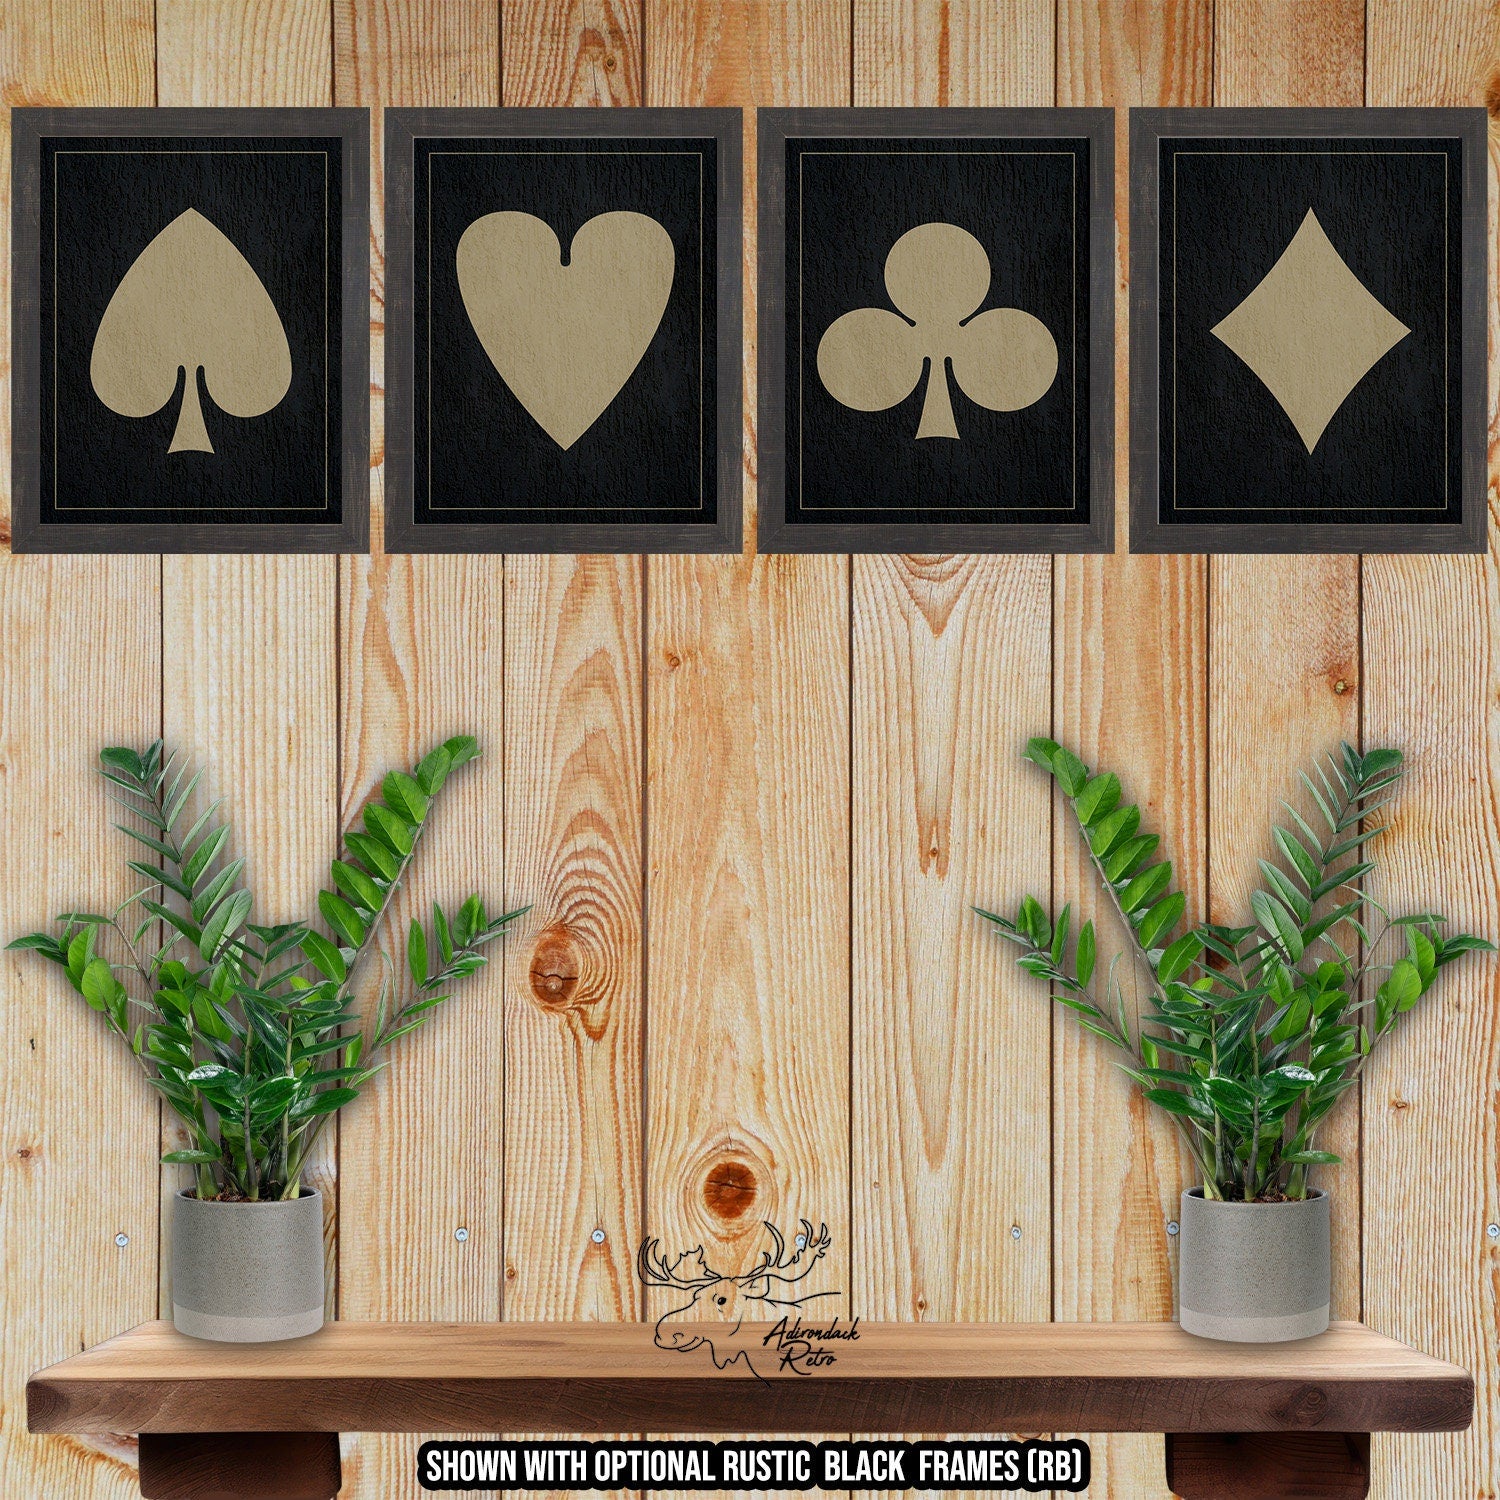 Four Poker Suits Set of Fine Art Prints - Black and Tan Playing Card Posters at Adirondack Retro